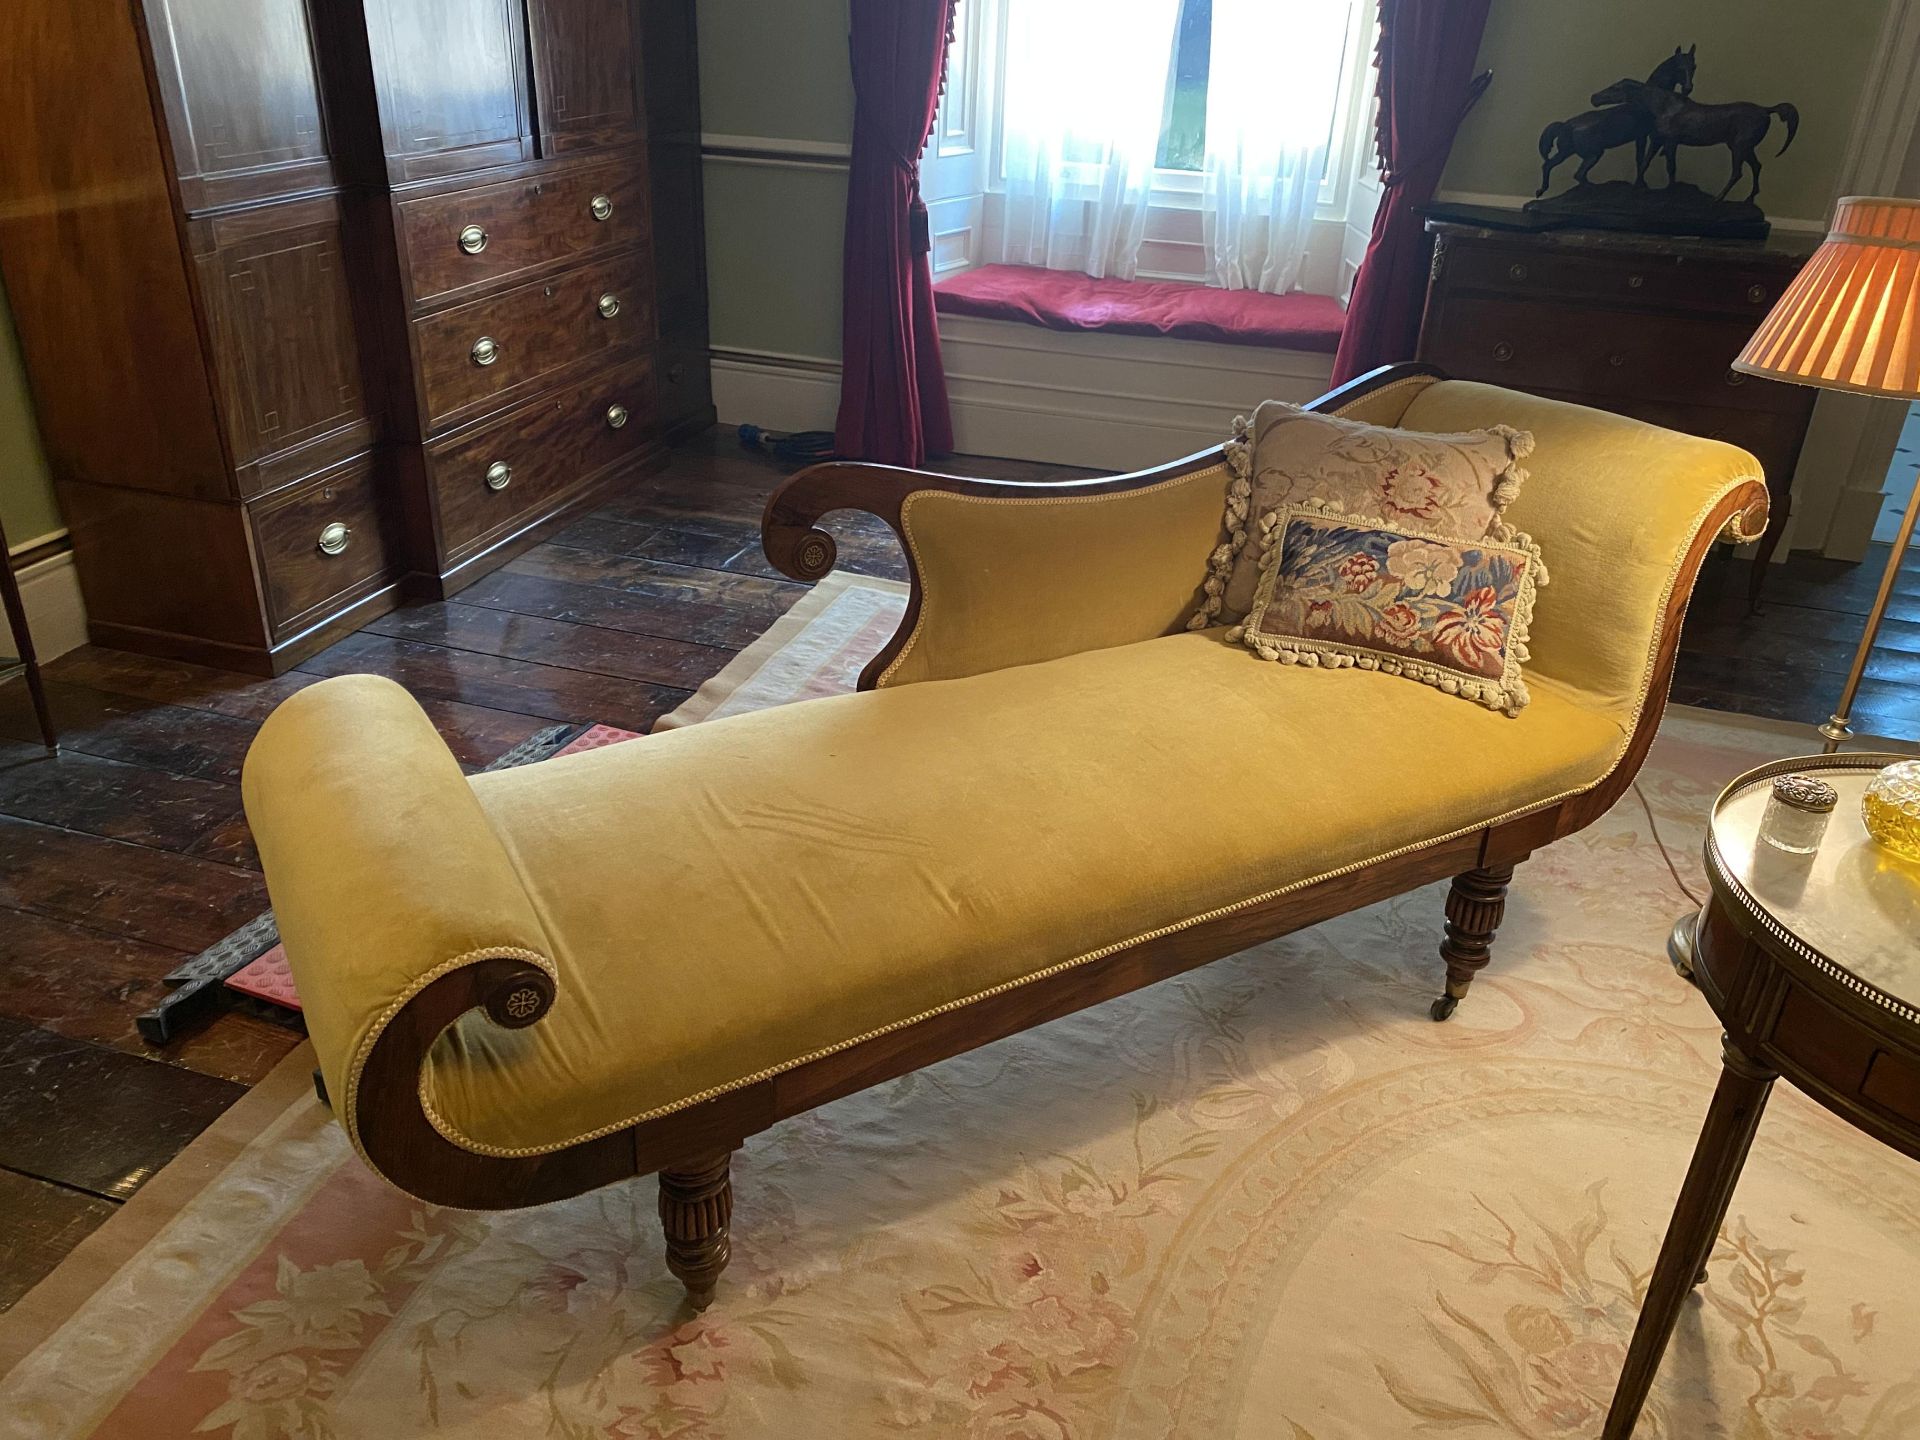 A Regency rosewood, mahogany and cut-brass inlaid chaise longueFirst seen in Season 2, in the Qu...